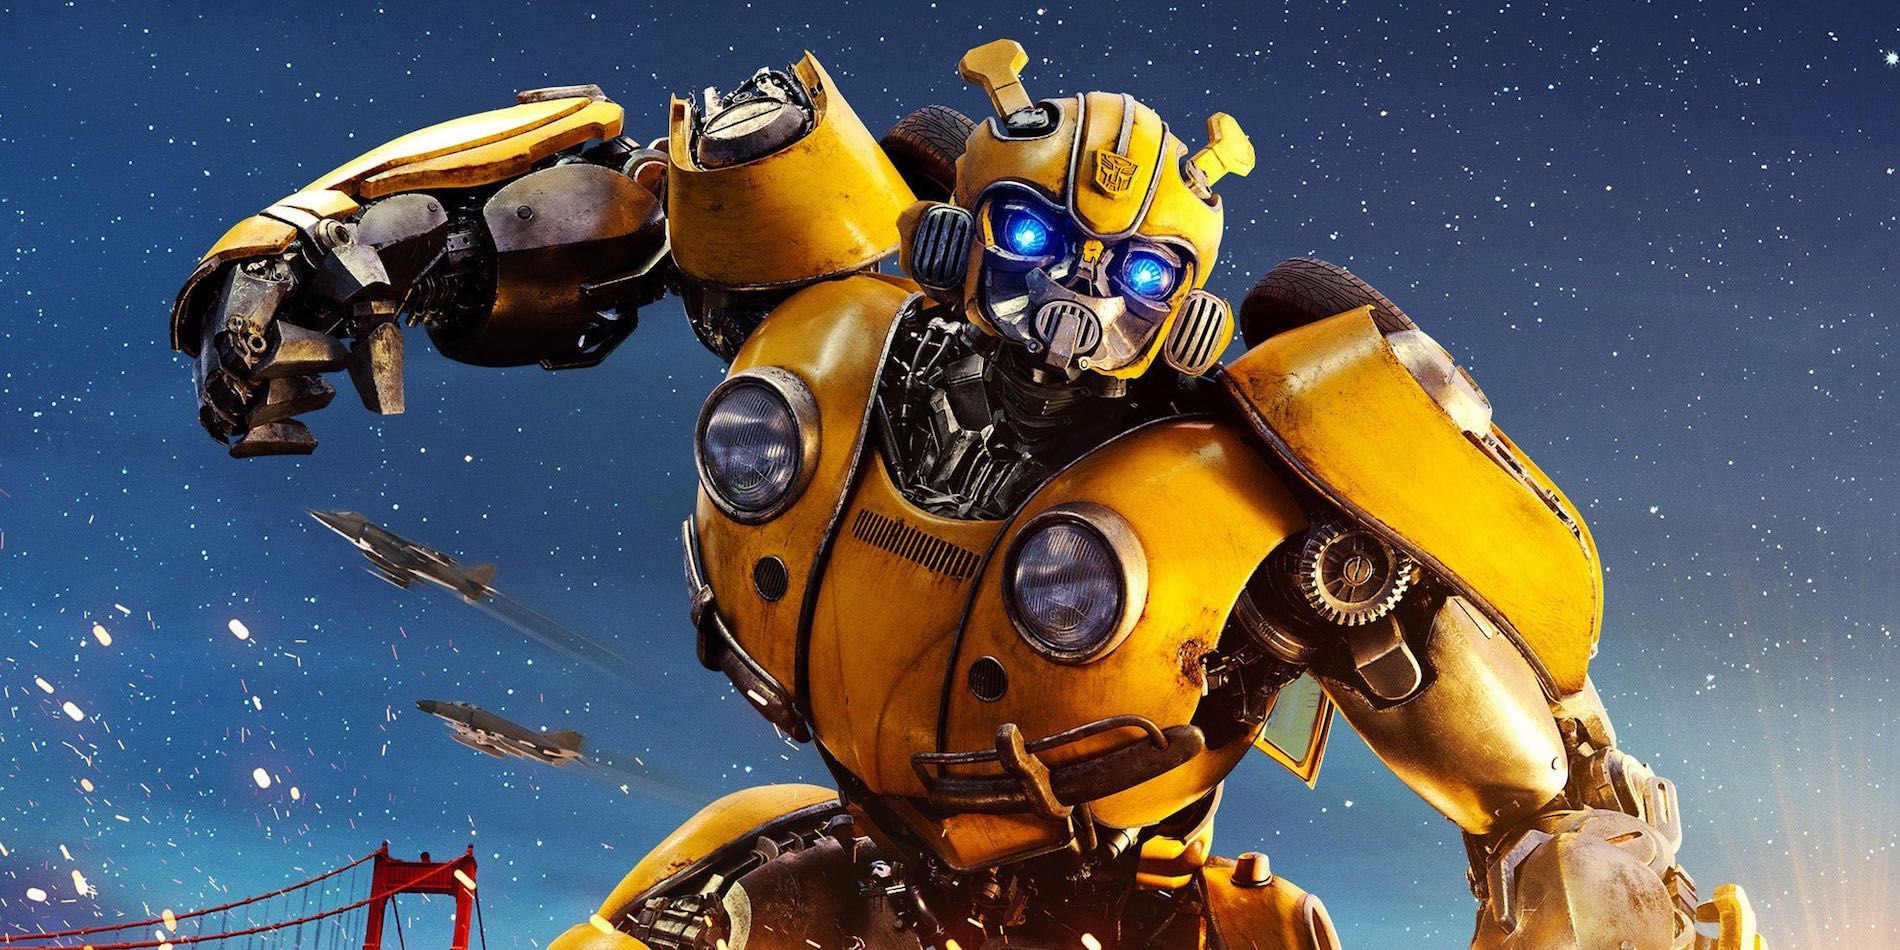 Bumblebee Movie Spoilers Discussion